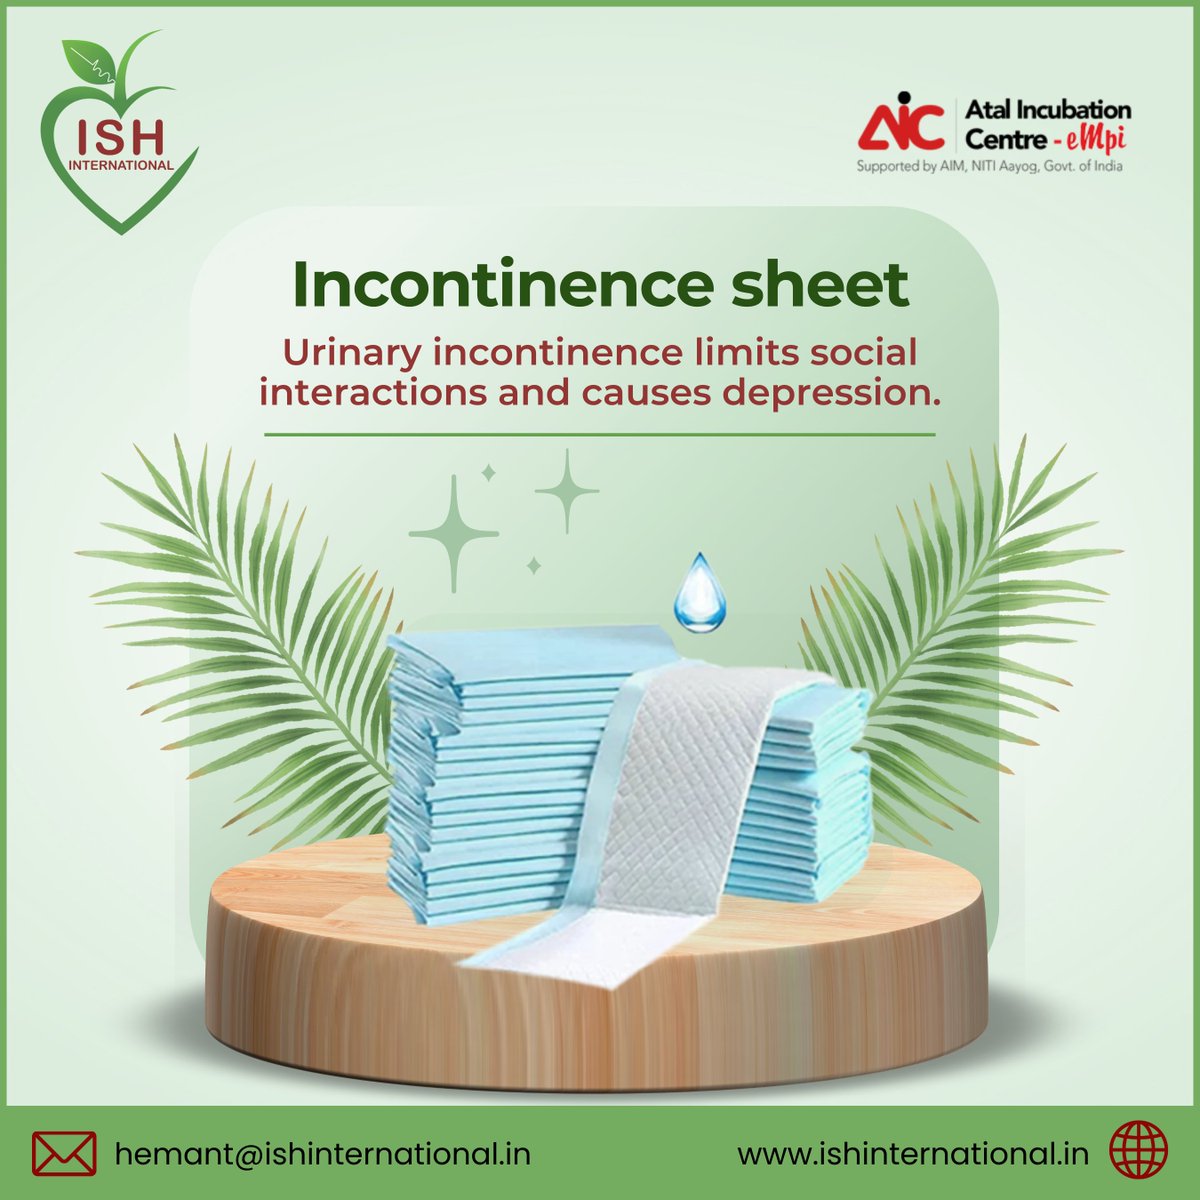 Stay comfortable and worry-free with our premium incontinence sheets. Protecting dignity with every use.

#IncontinenceCare #Comfort #ISHCARE #ecohygiene #Sheet #IncontinenceSheet #ISHInternational